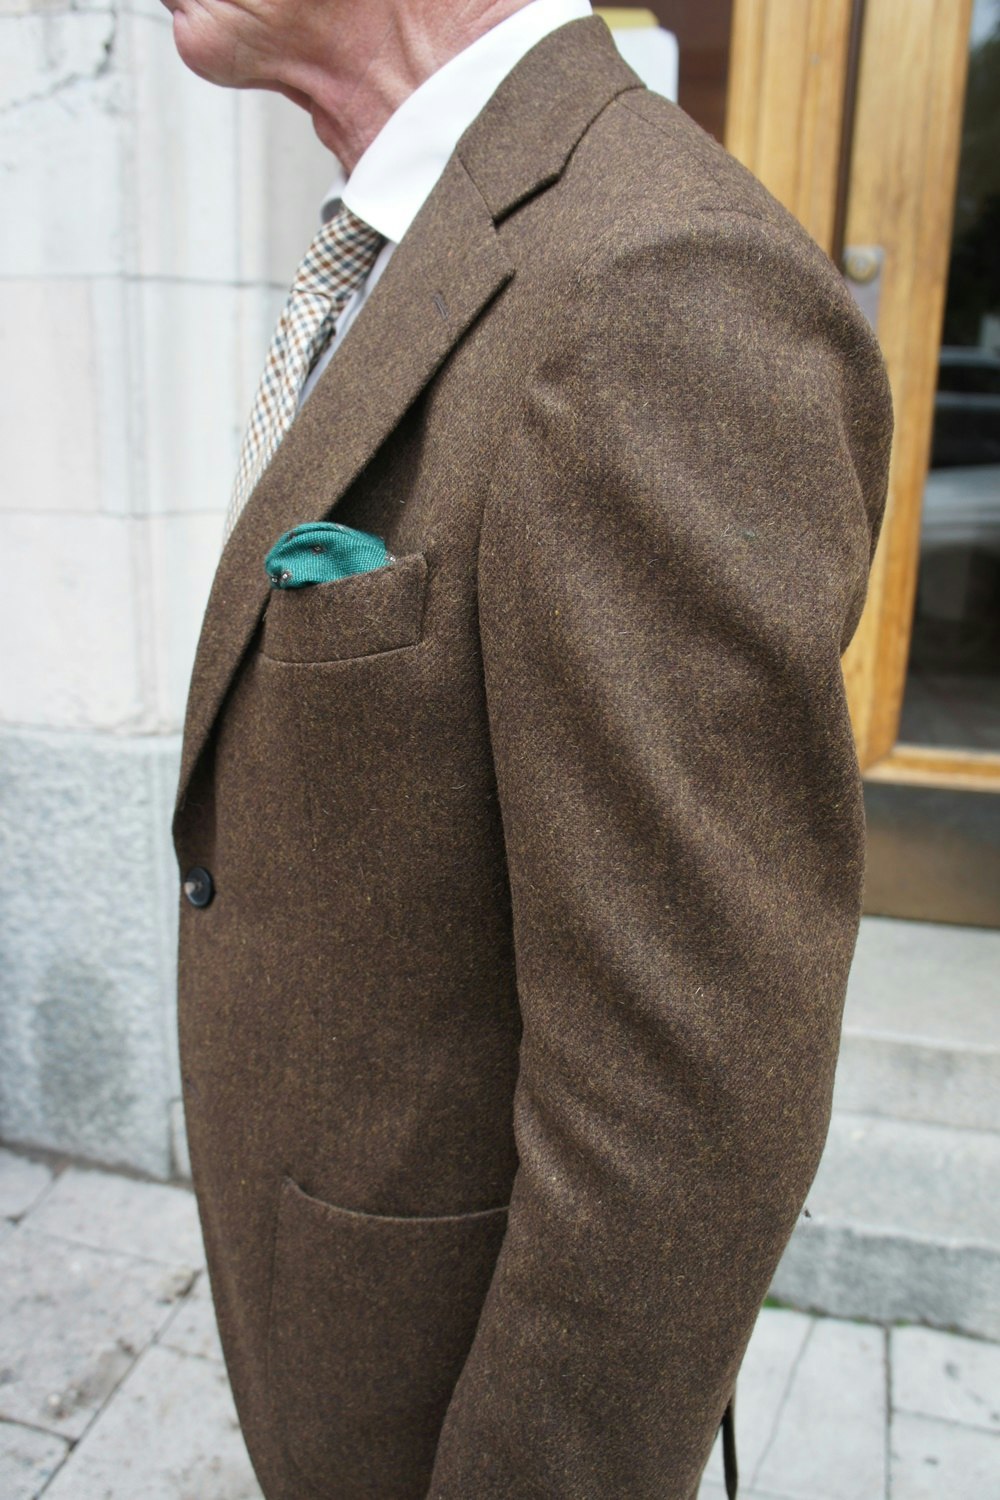 Solid Wool Jacket - Unconstructed - Brown